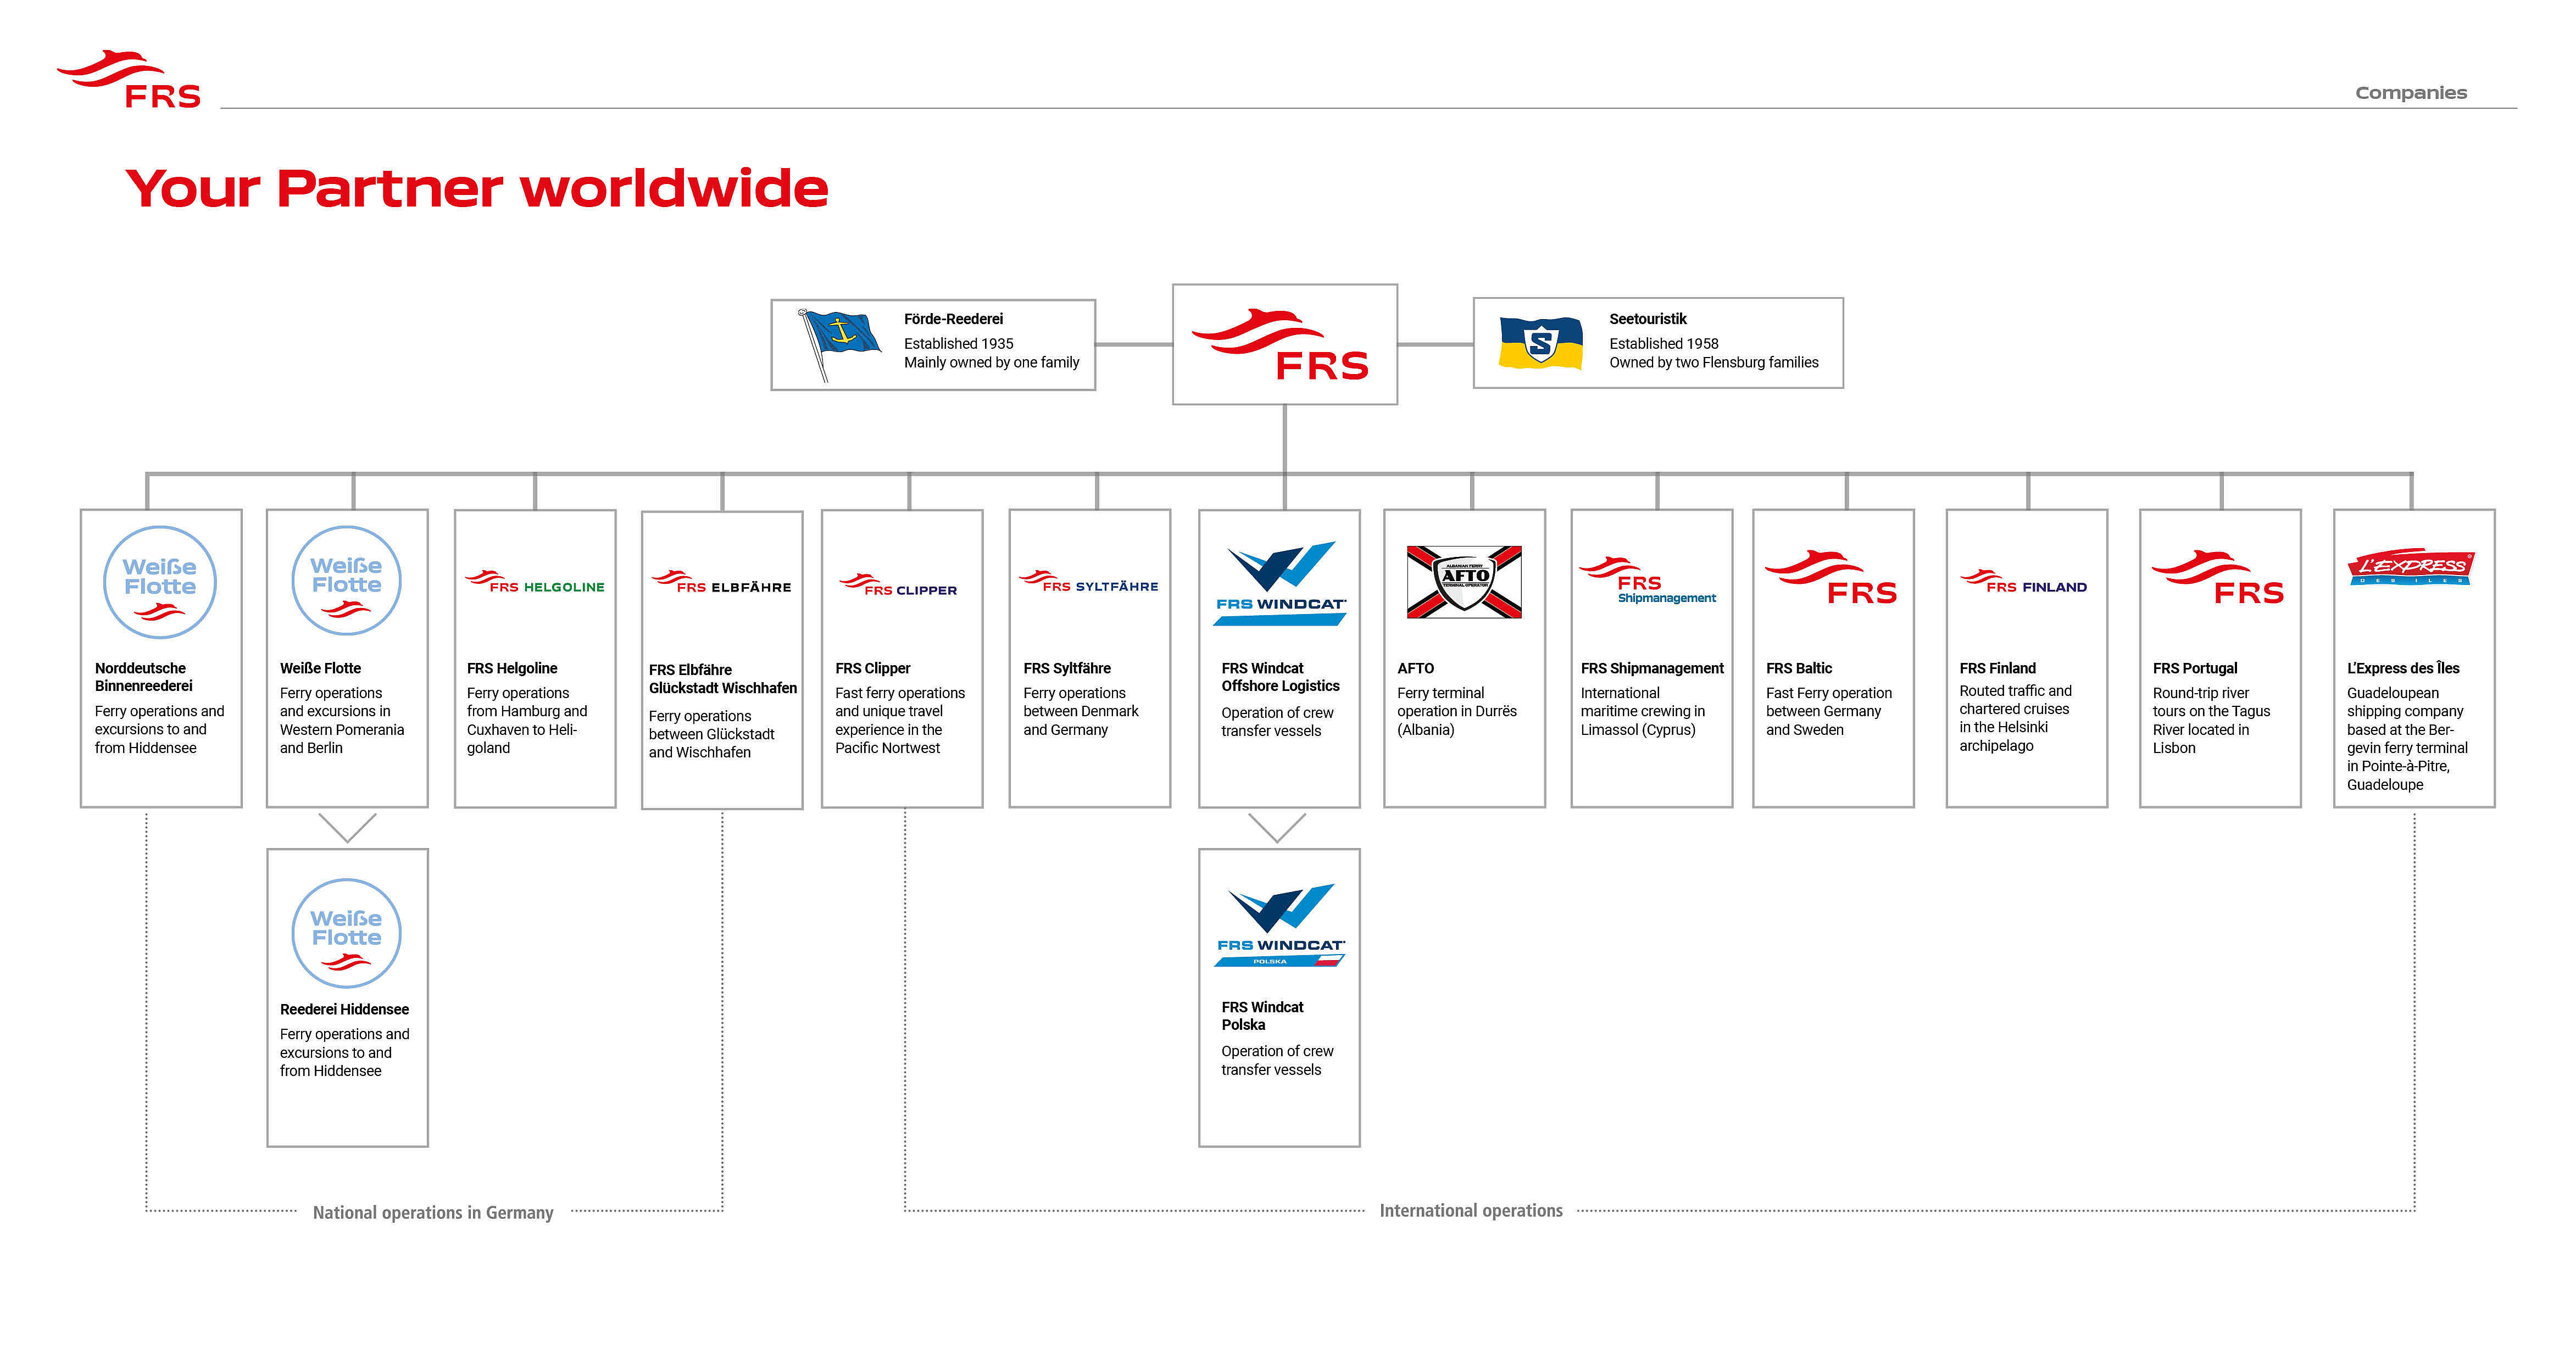 Connections between main company(FRS) and subsidiaries (Helgoline, Weiße Flotte, Clipper,...).